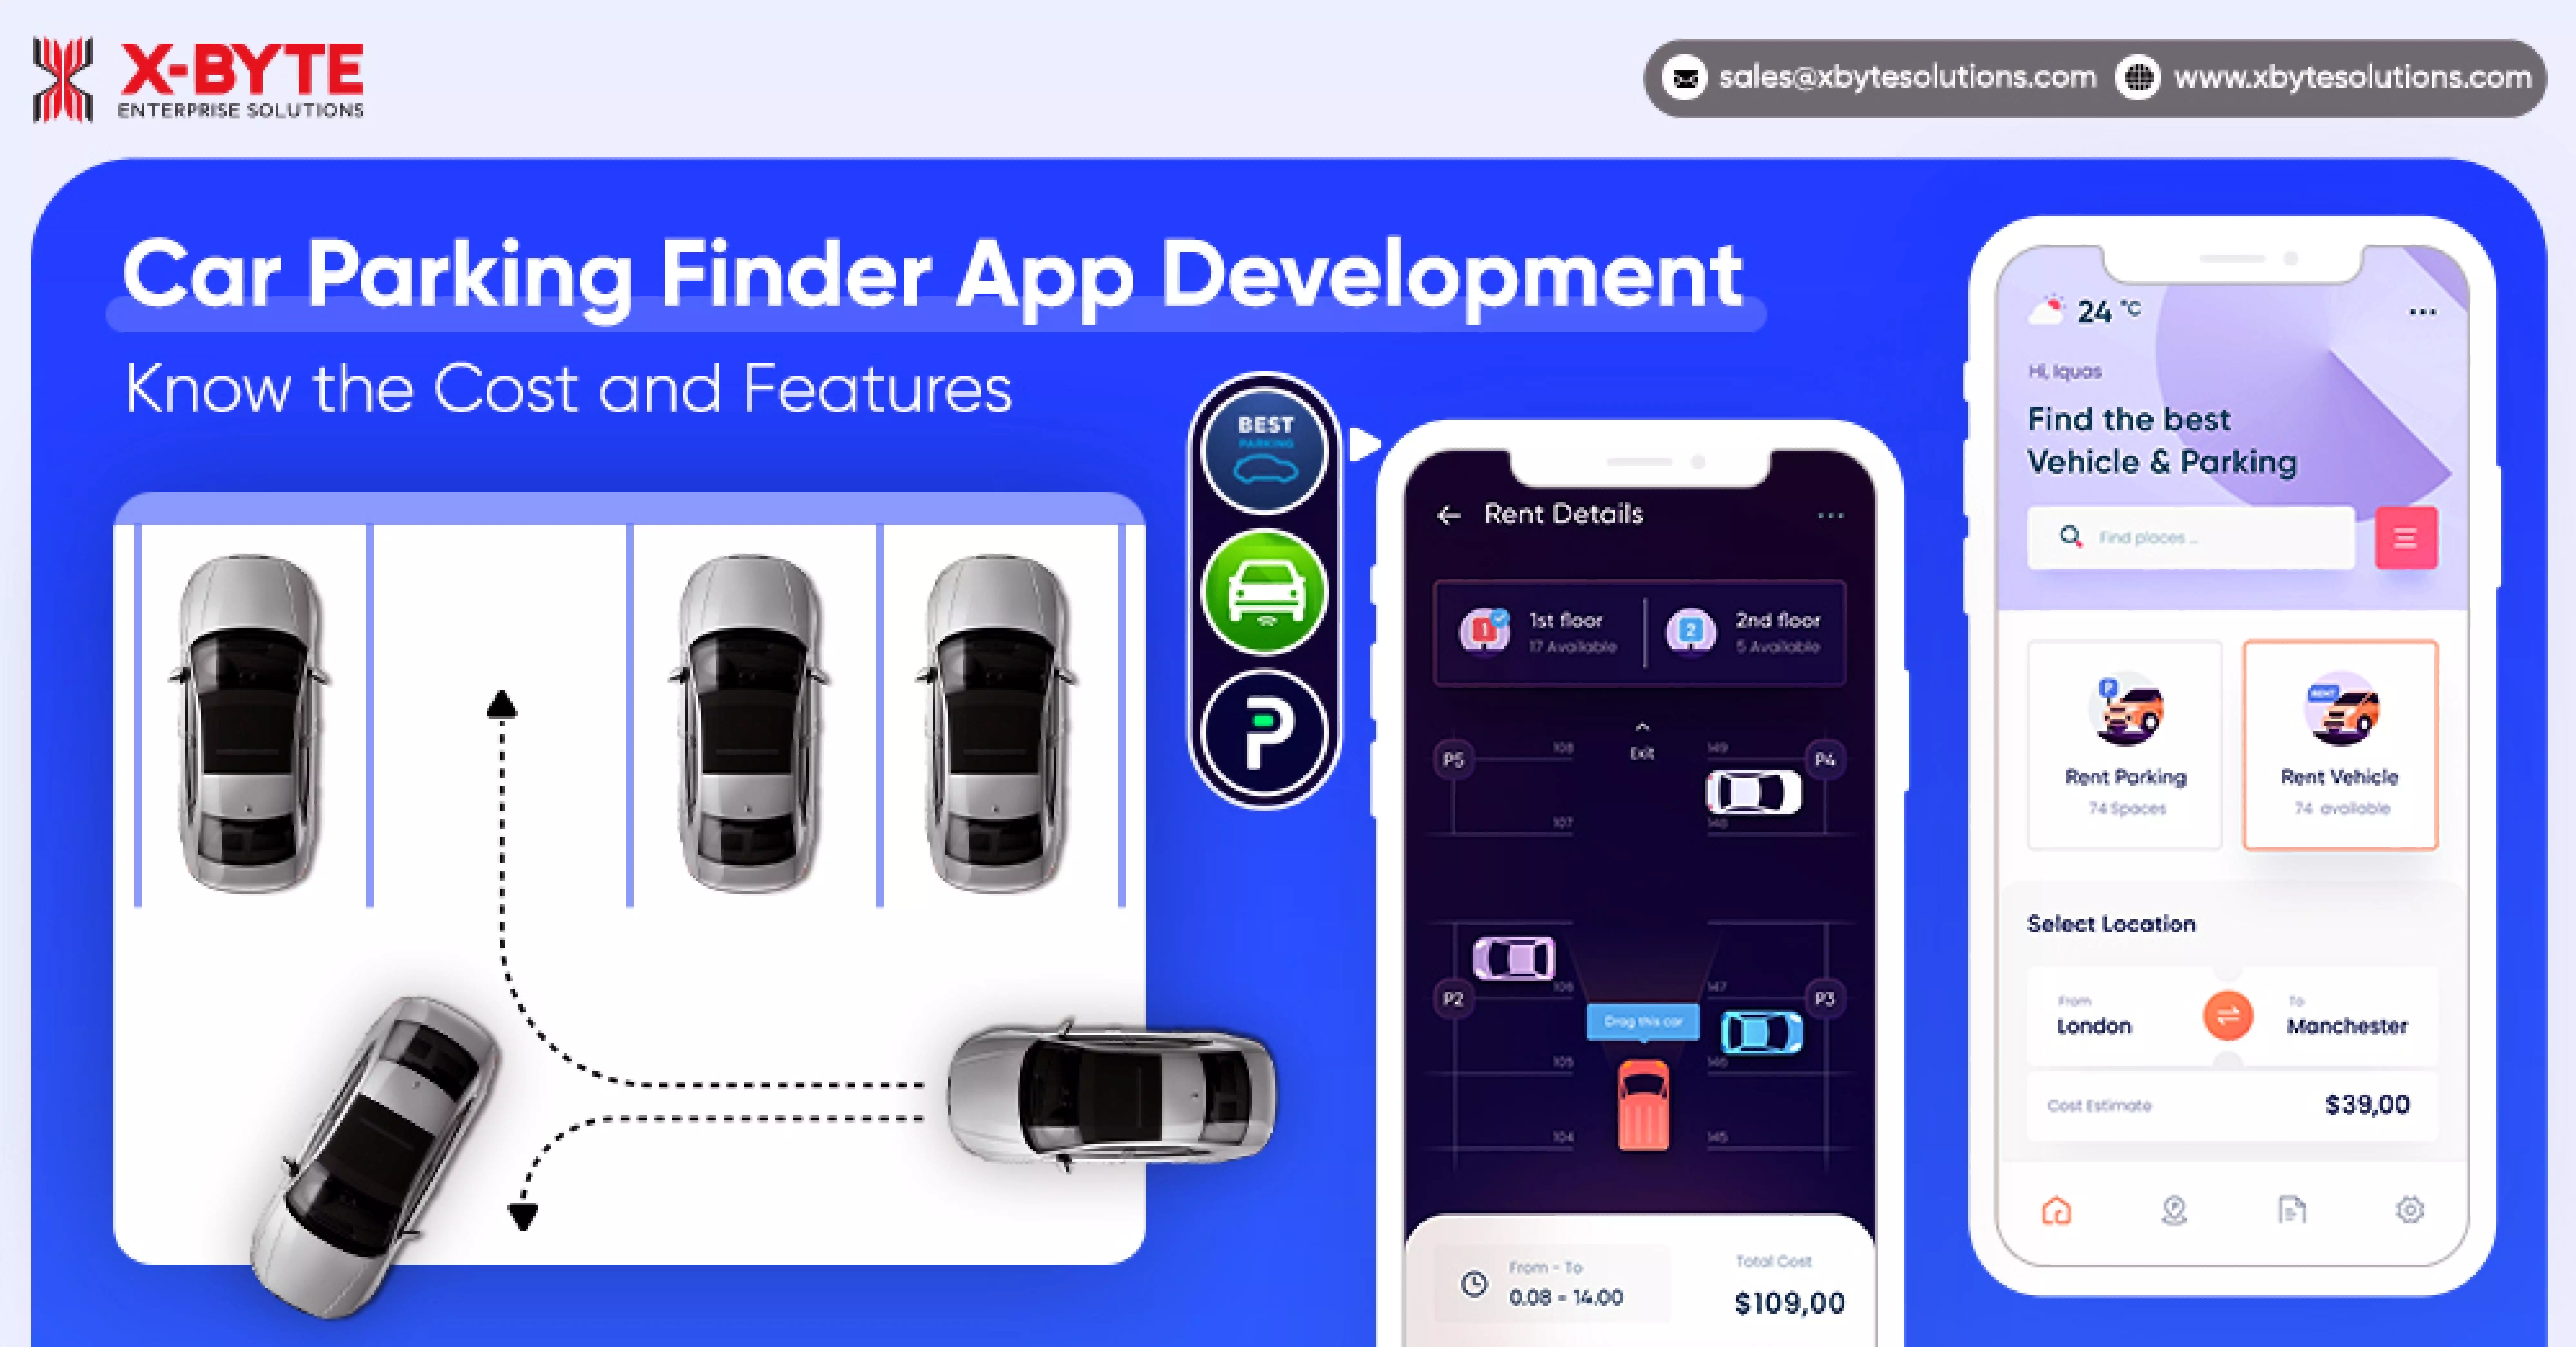 Car Parking Finder App Development – Know the Cost and Features